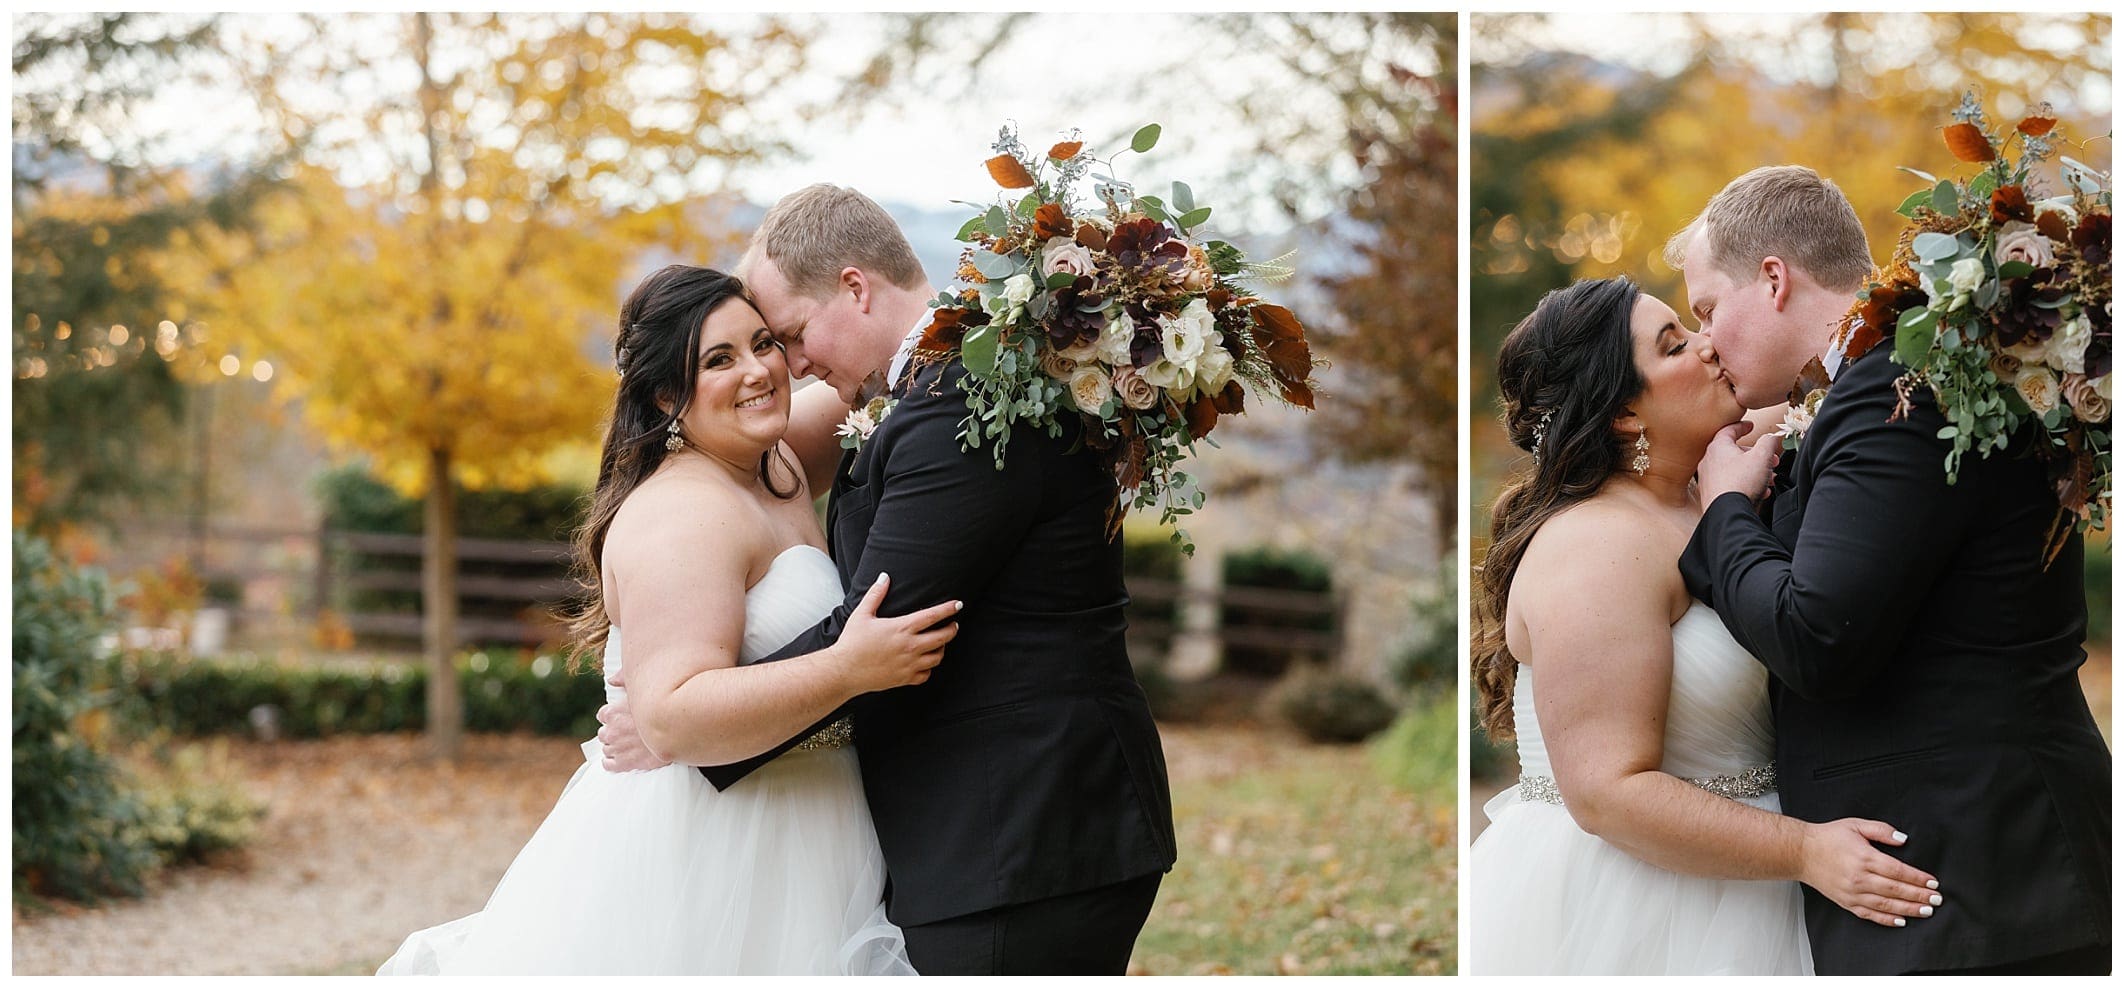 bride and groom portrait outdoors for fall wedding